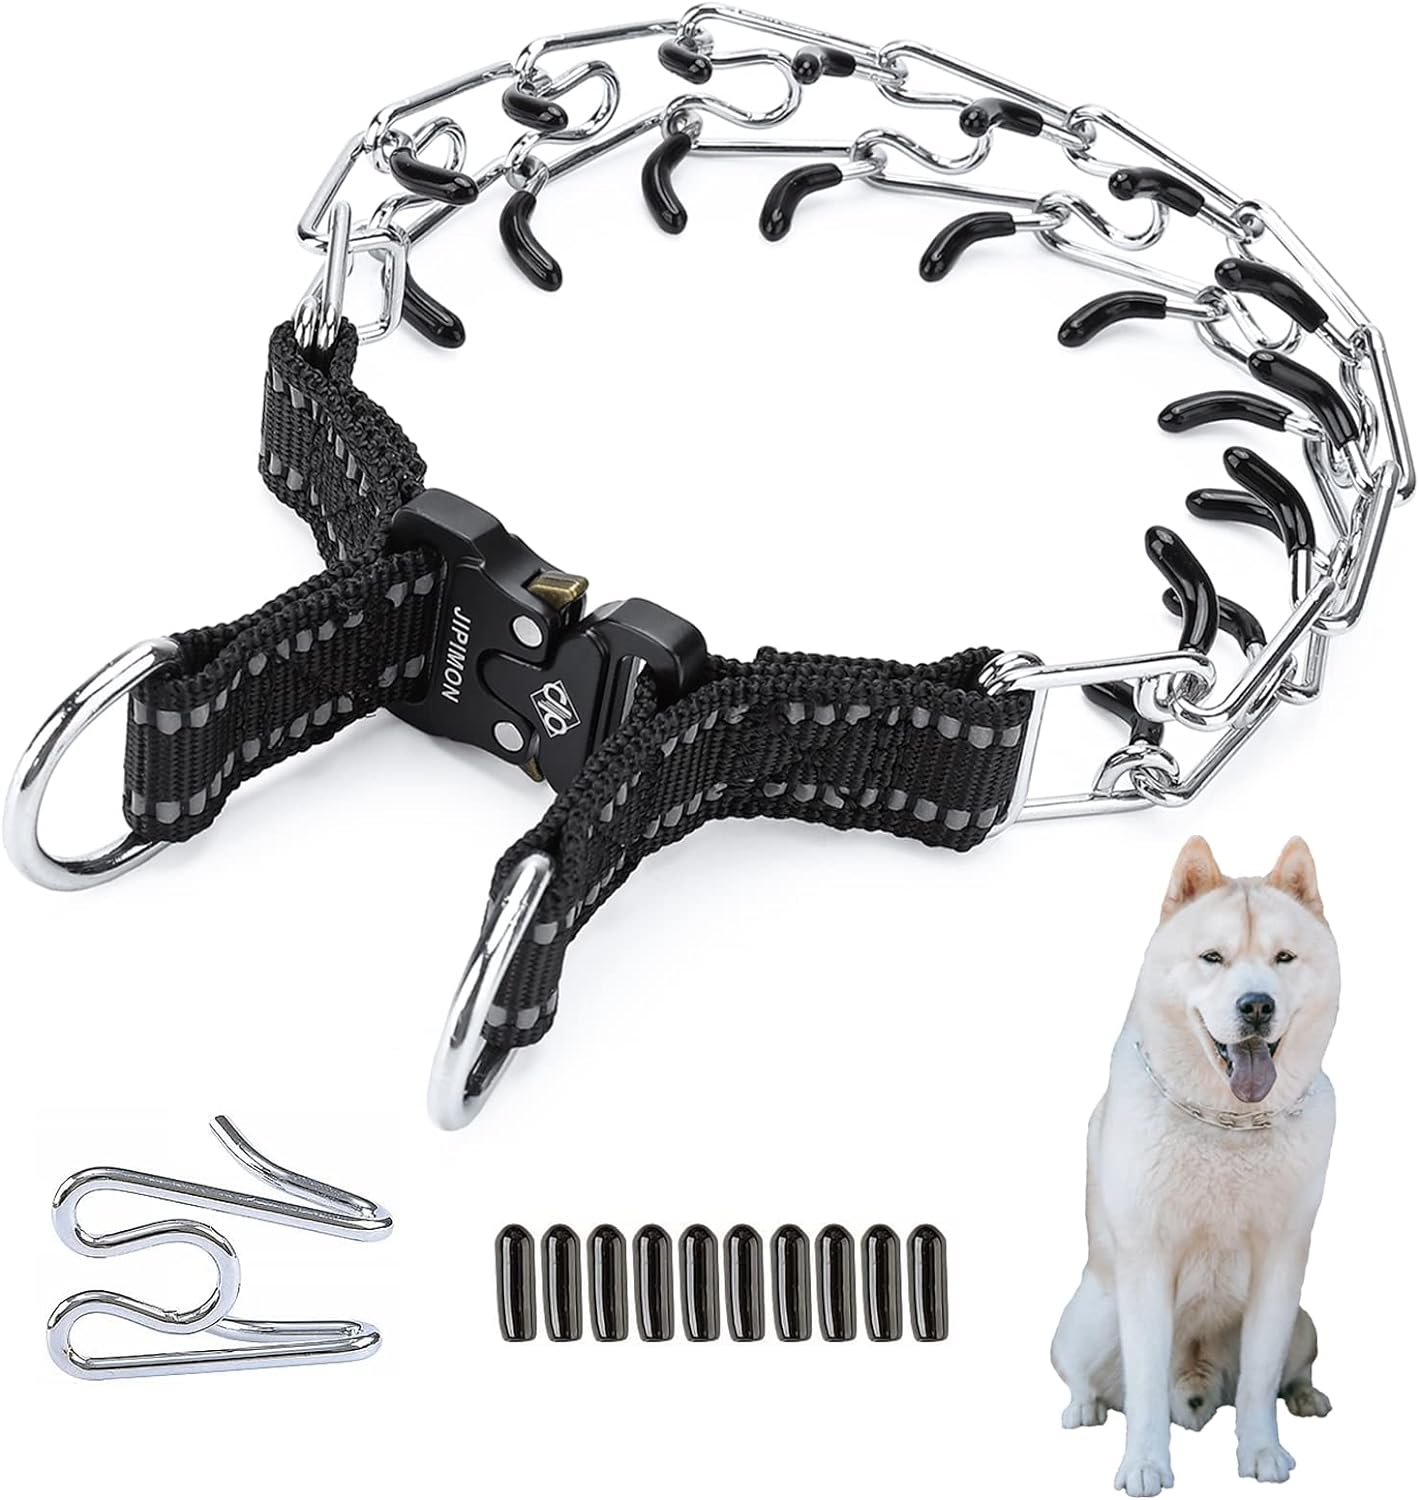 Prong Collar for Dogs Adjustable No Pull Dog Choke Pinch Training Collar with Comfortable Rubber Tip for Small Medium Large Dogs (Medium, Black)